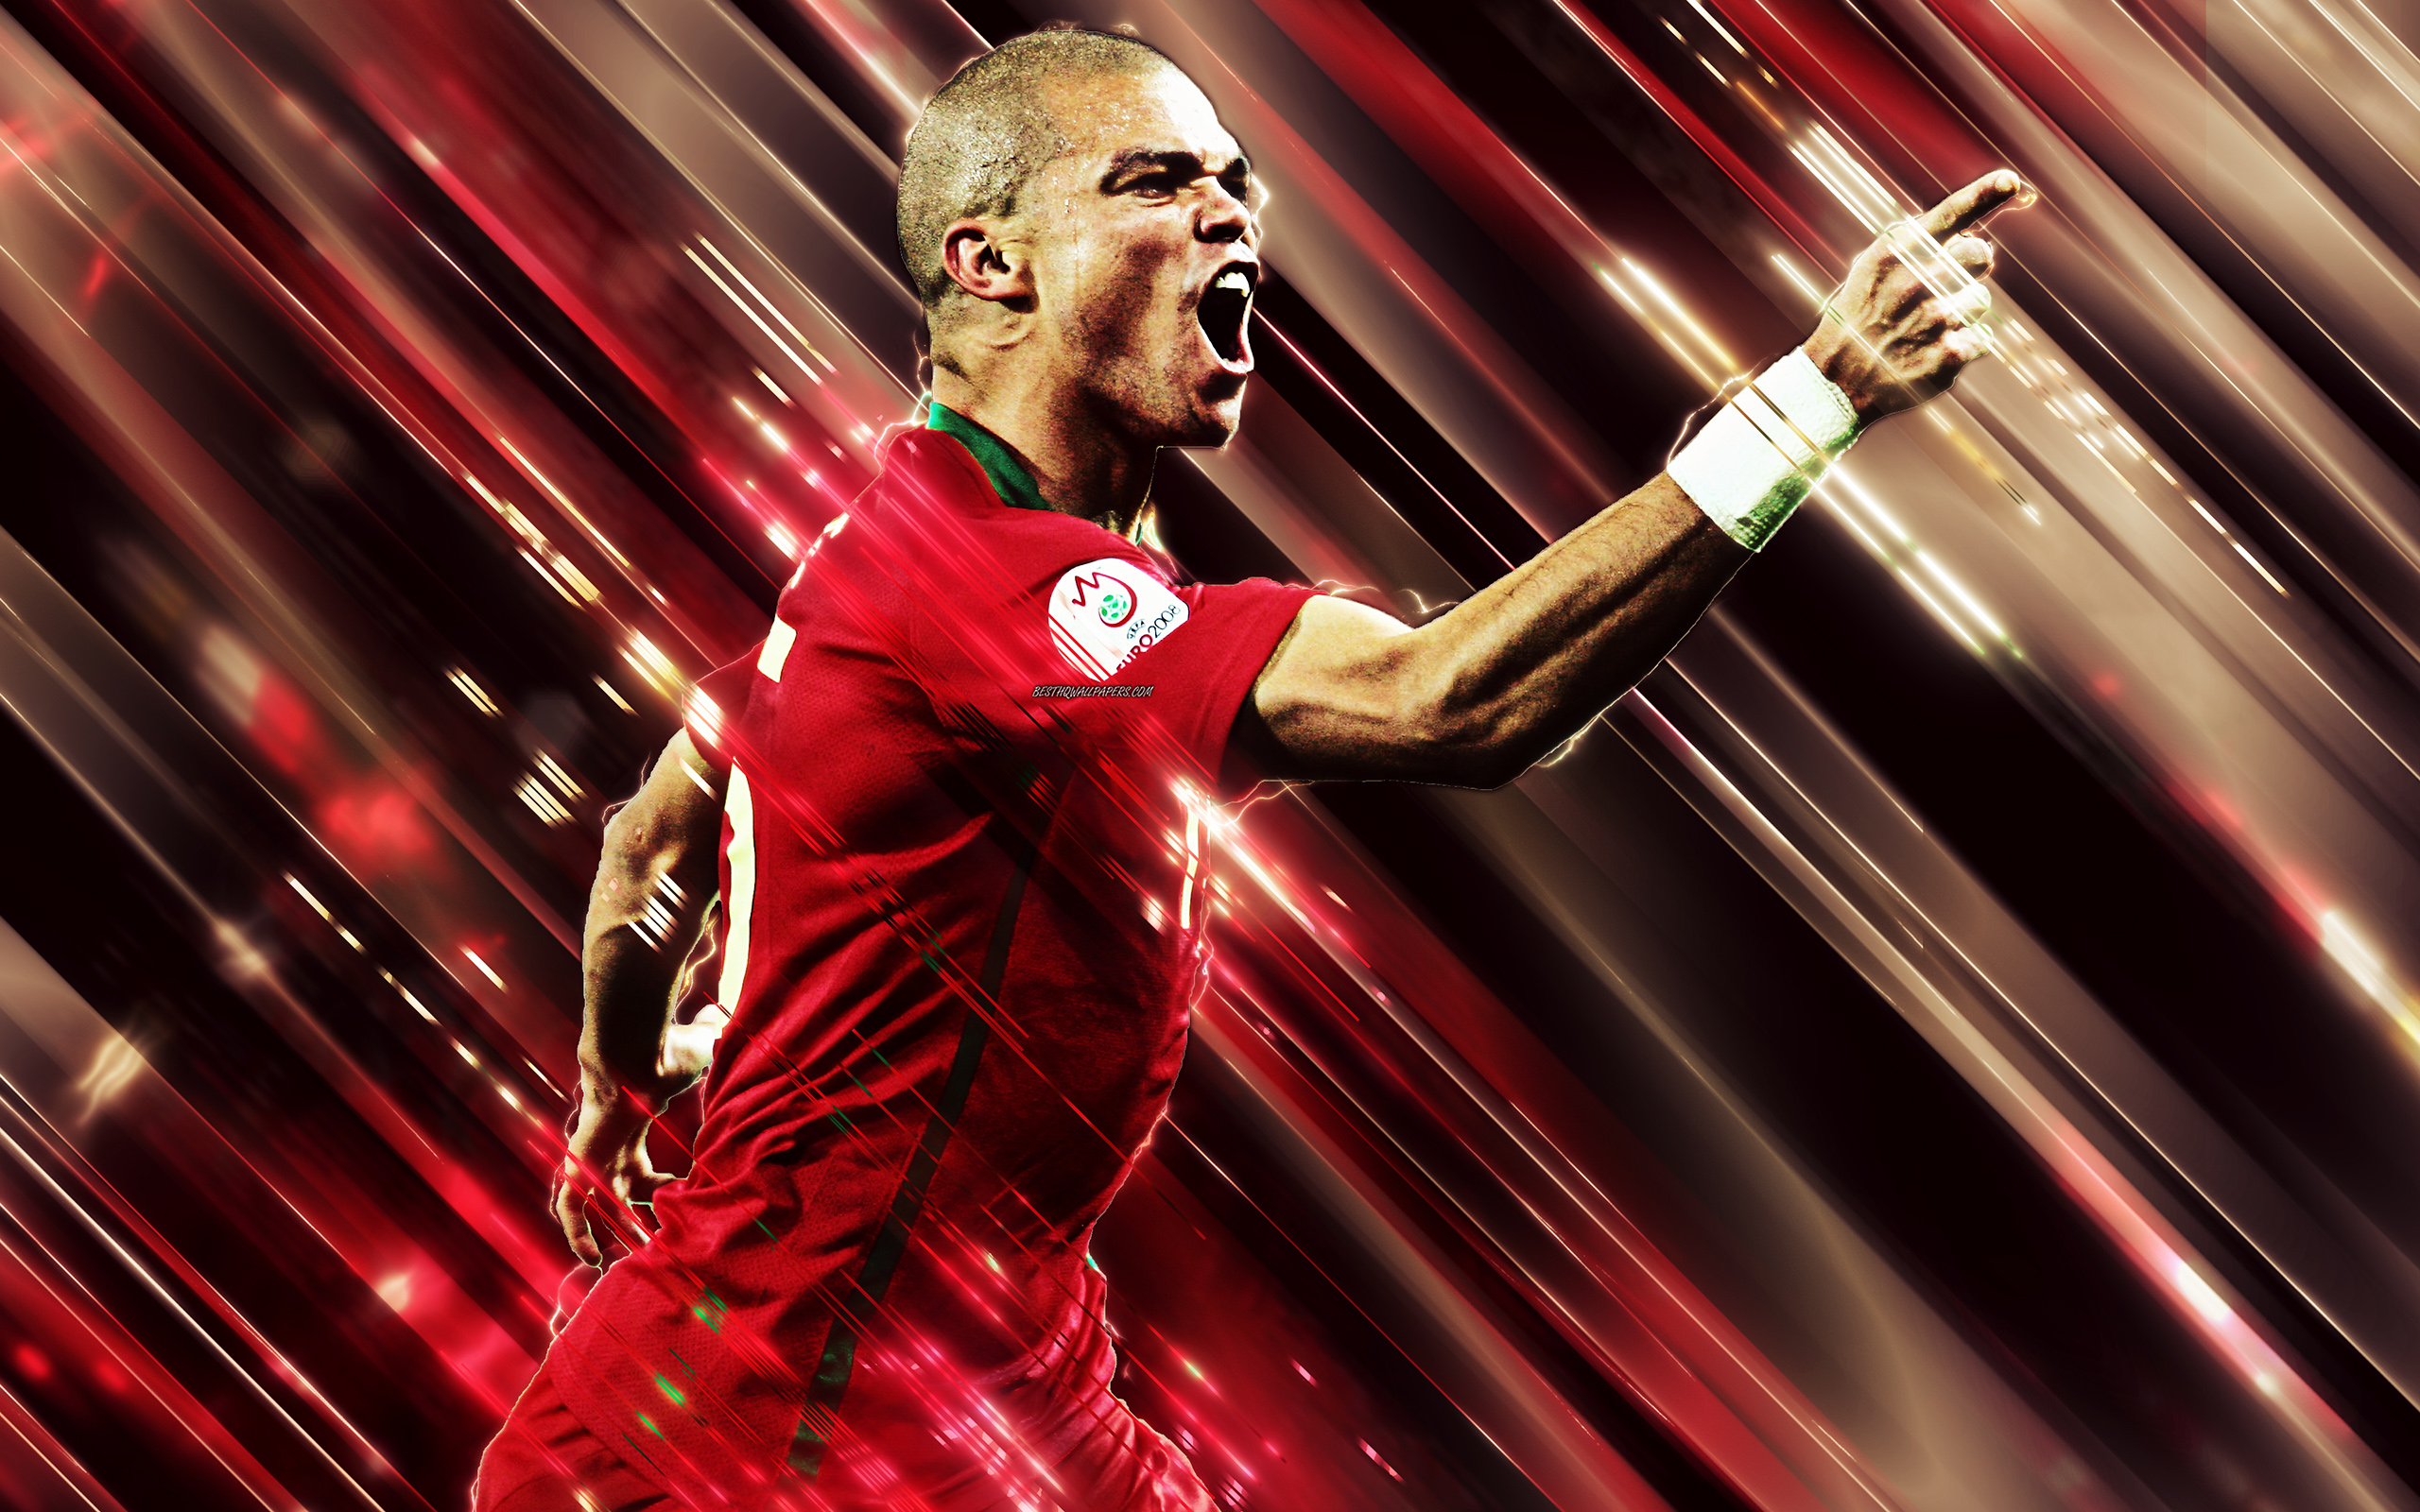 Download wallpaper Pepe, Kepler Laveran Lima Ferreira, creative art, blades style, Portuguese footballer, Portugal national football team, red creative background, Portugal, football for desktop with resolution 2560x1600. High Quality HD picture